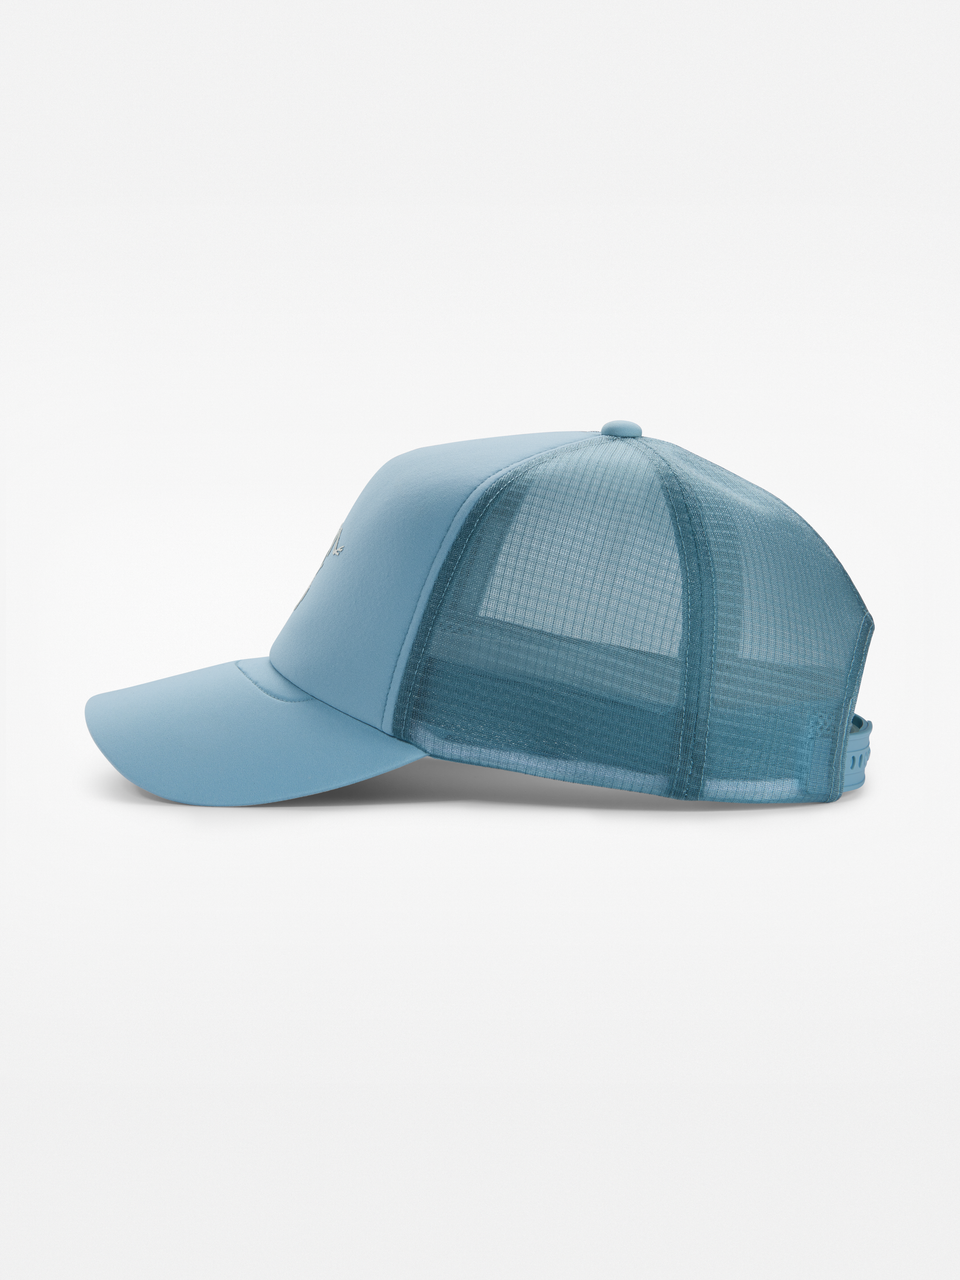 Bird Trucker Curved Hat Solace